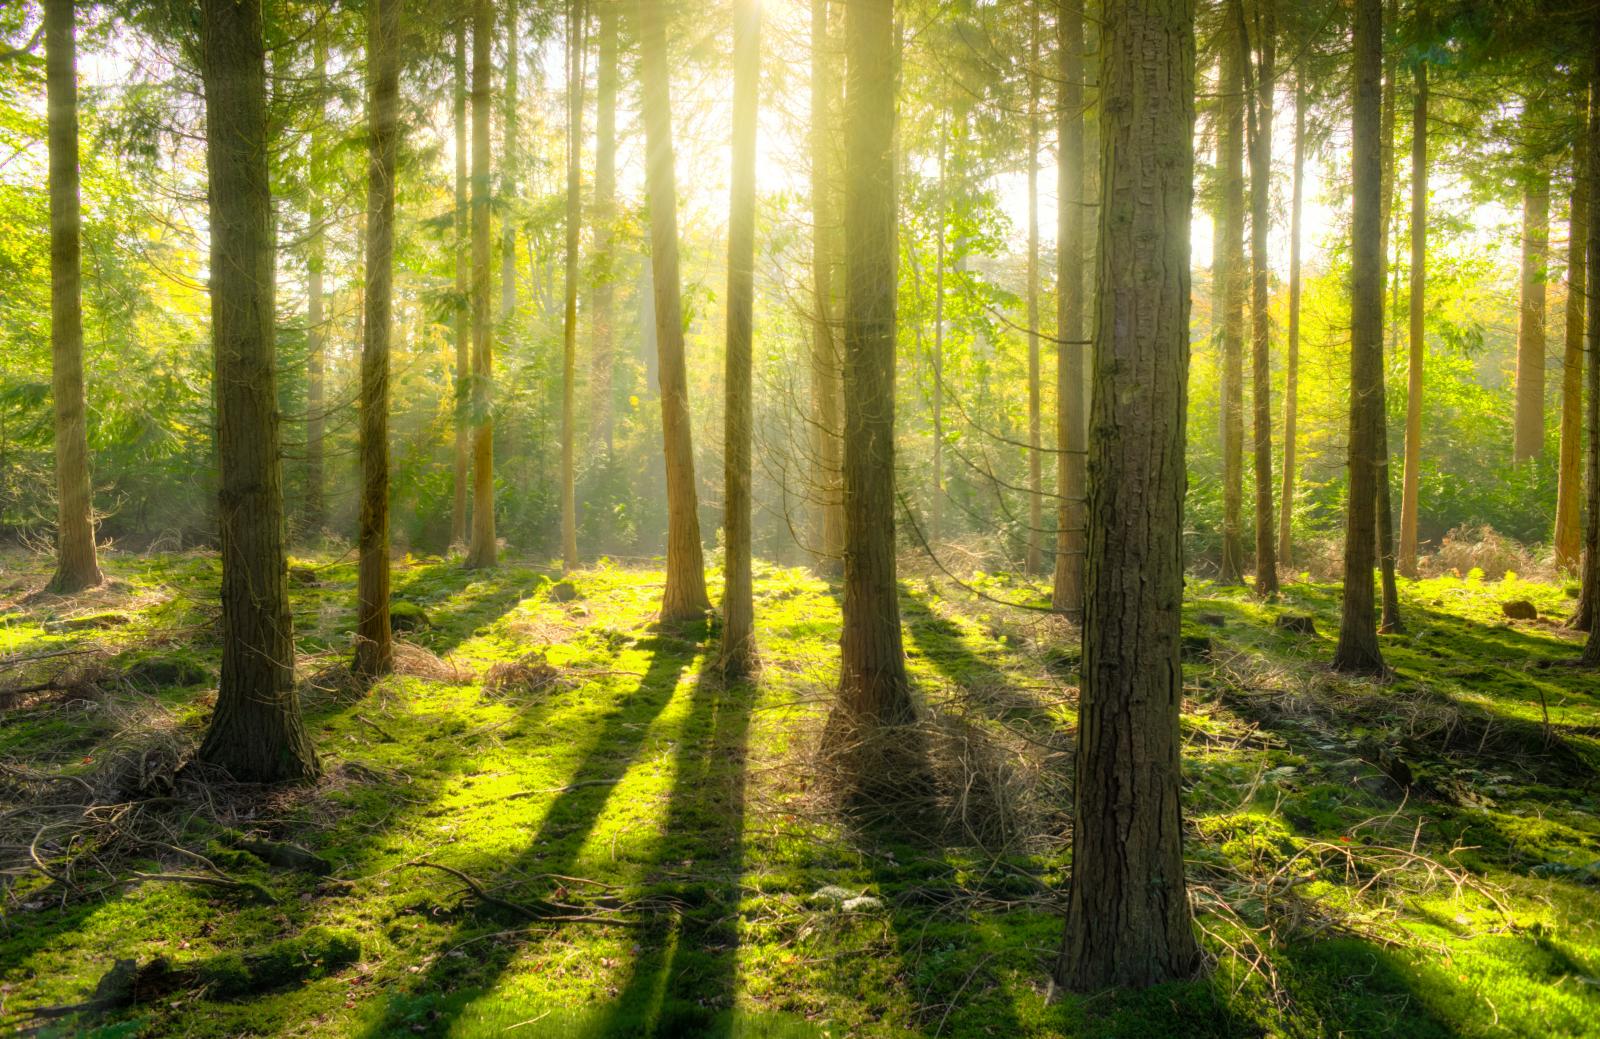 Forest. Photo credit: Pexels